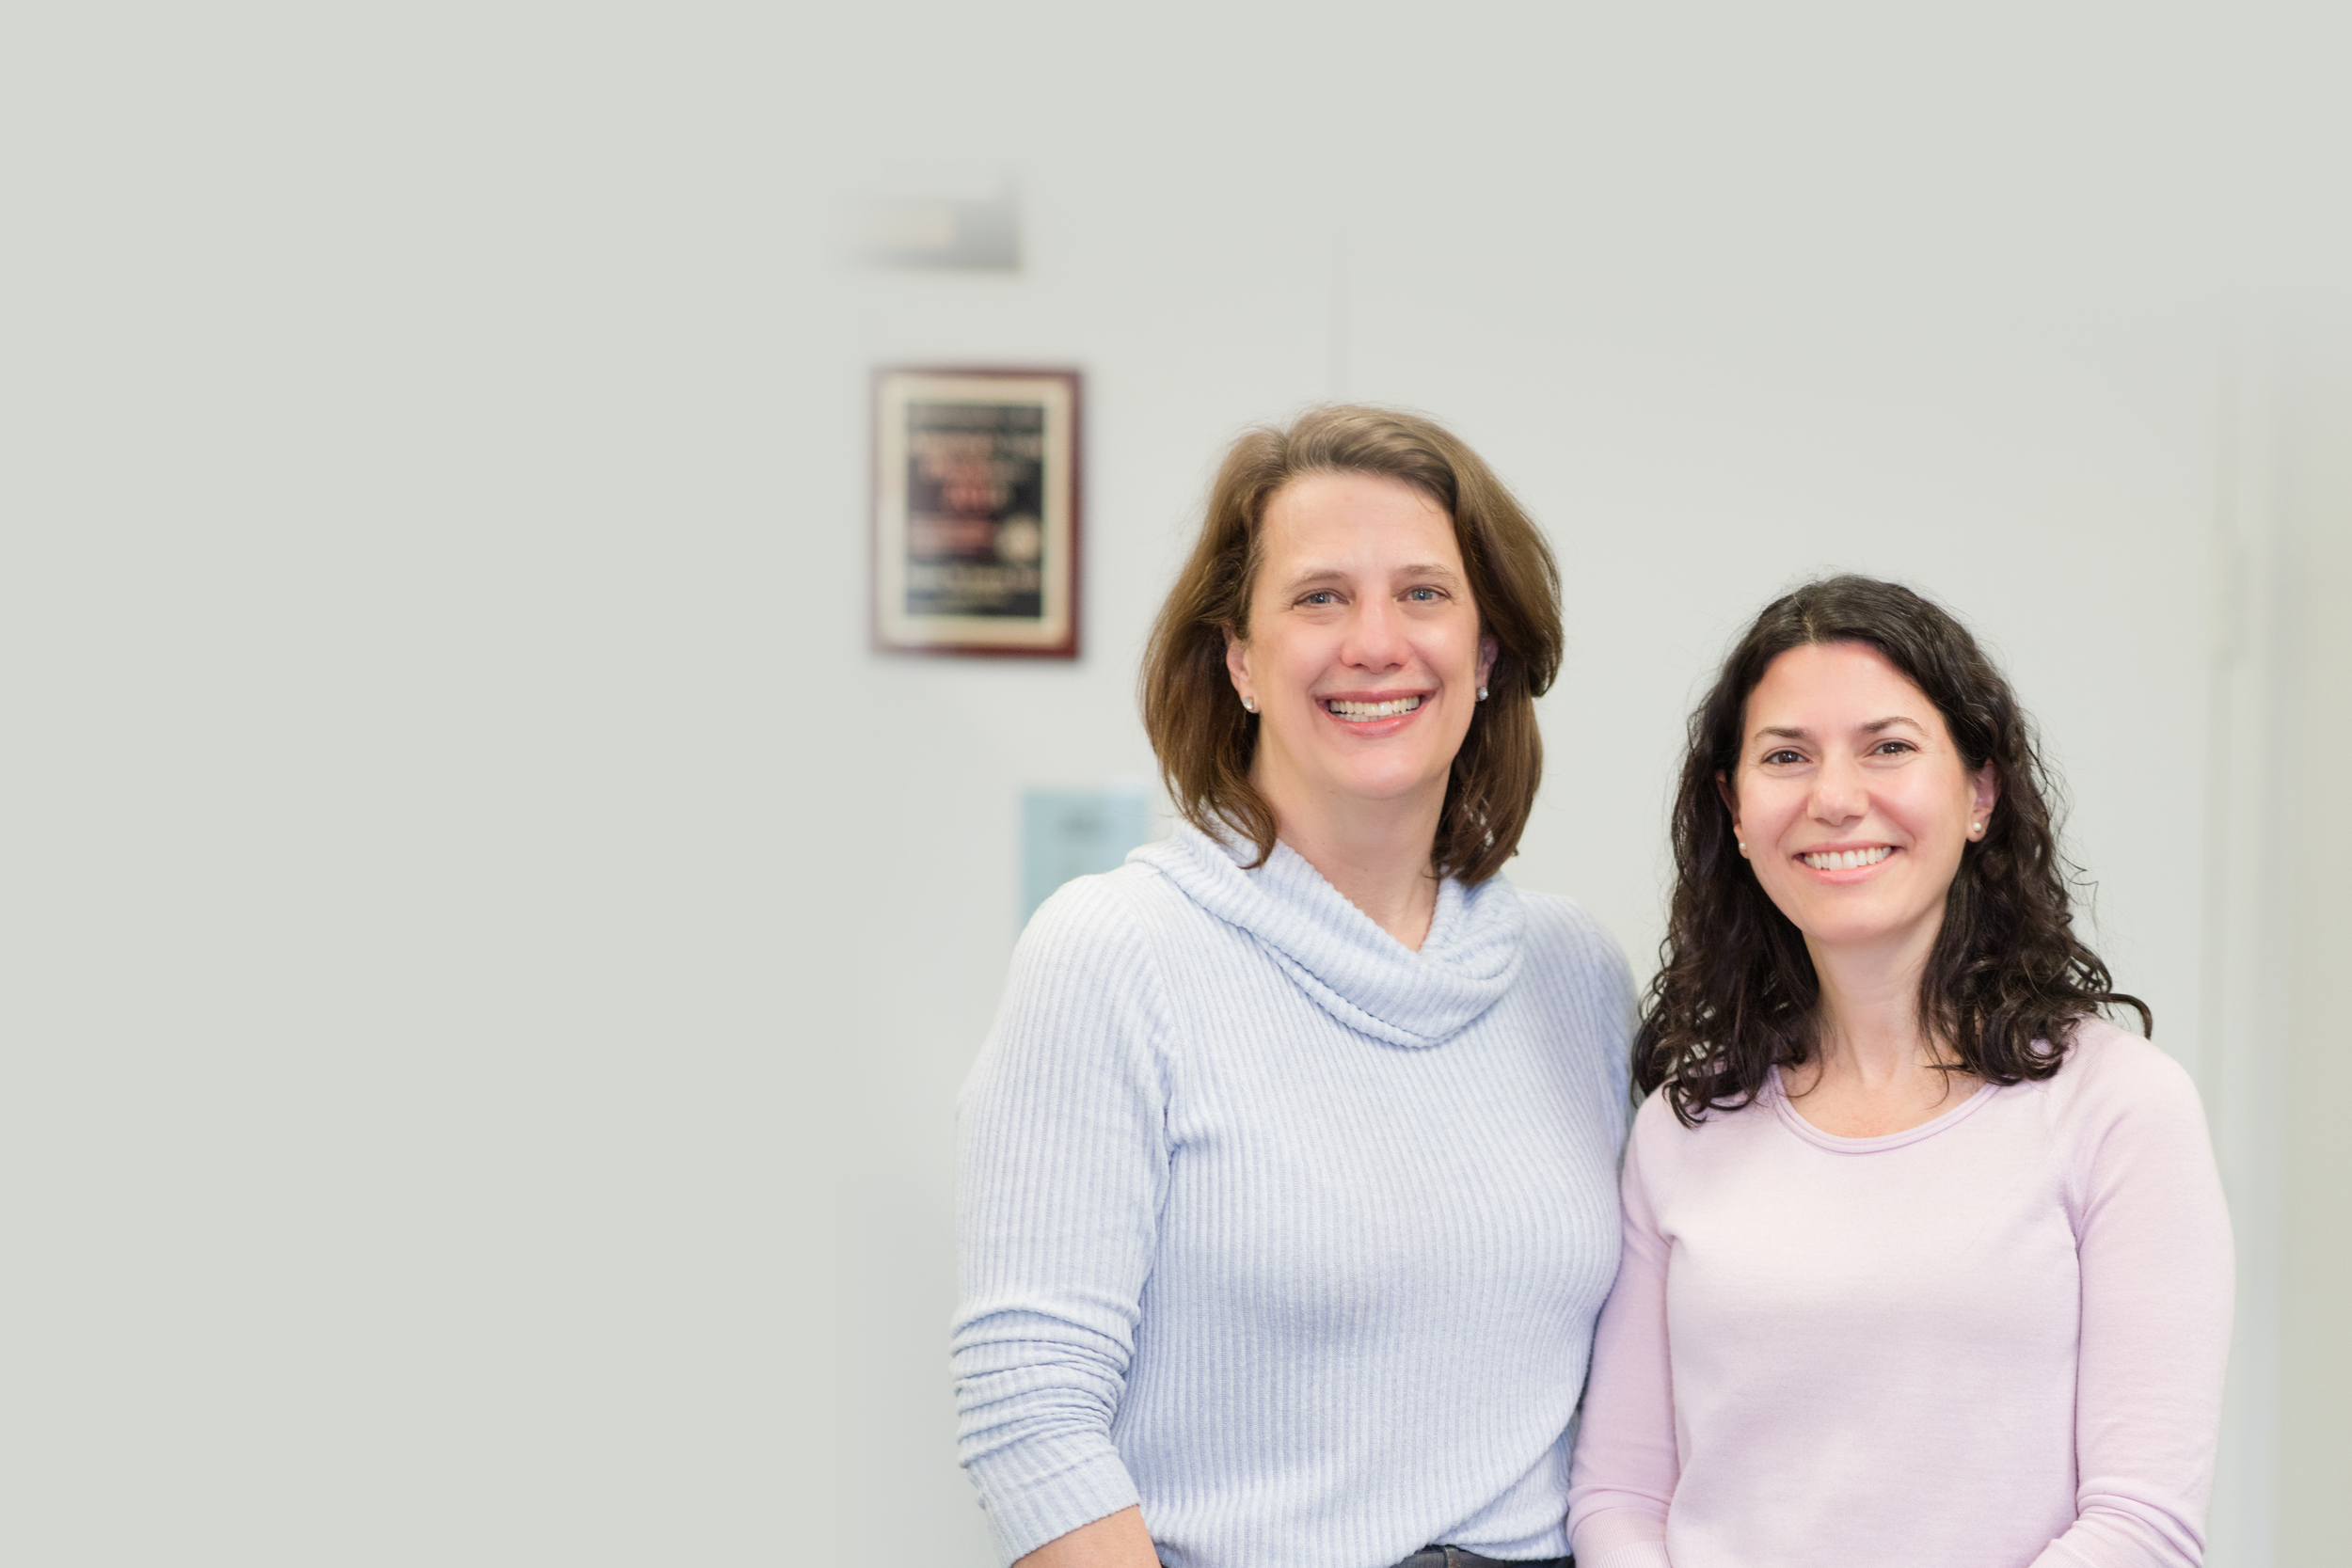 New York City primary care physicians, Dr. Regina Janicik and Dr. Ora Pearlstein collaborate with Castle Connolly Private Health Partners to convert their practice to the concierge model